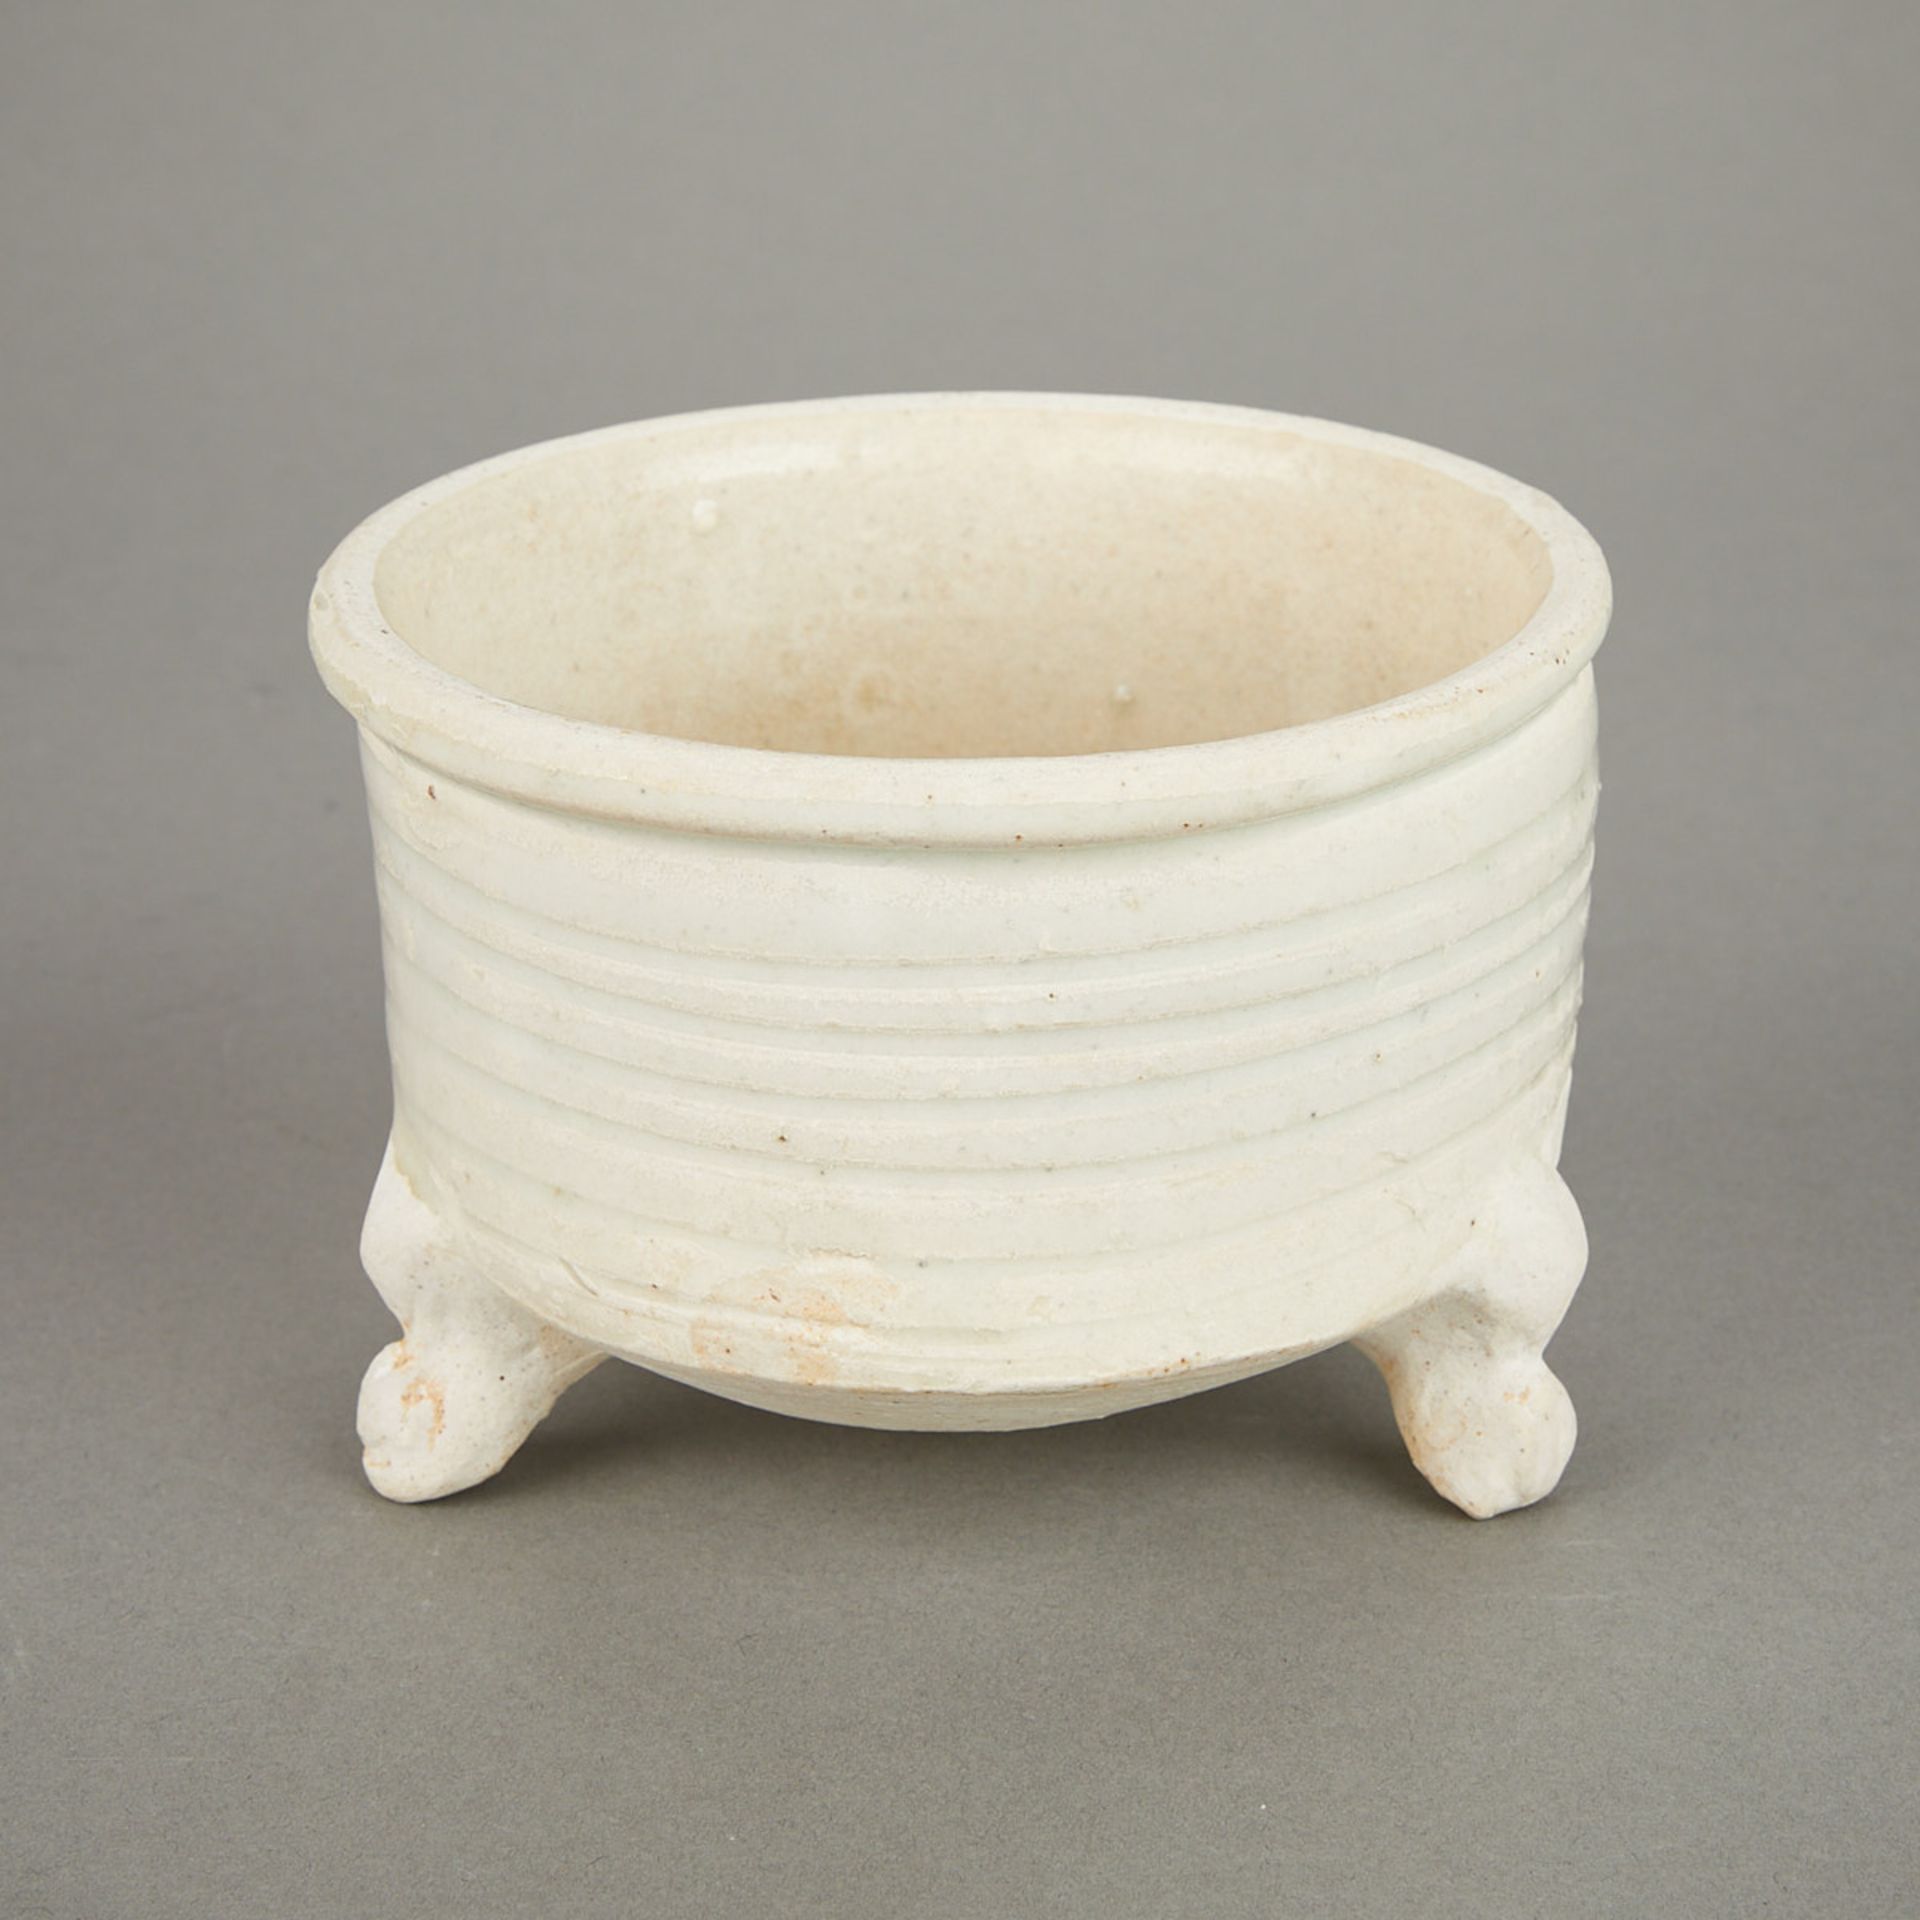 Chinese Song Ceramic Tripod Censer - Image 2 of 8